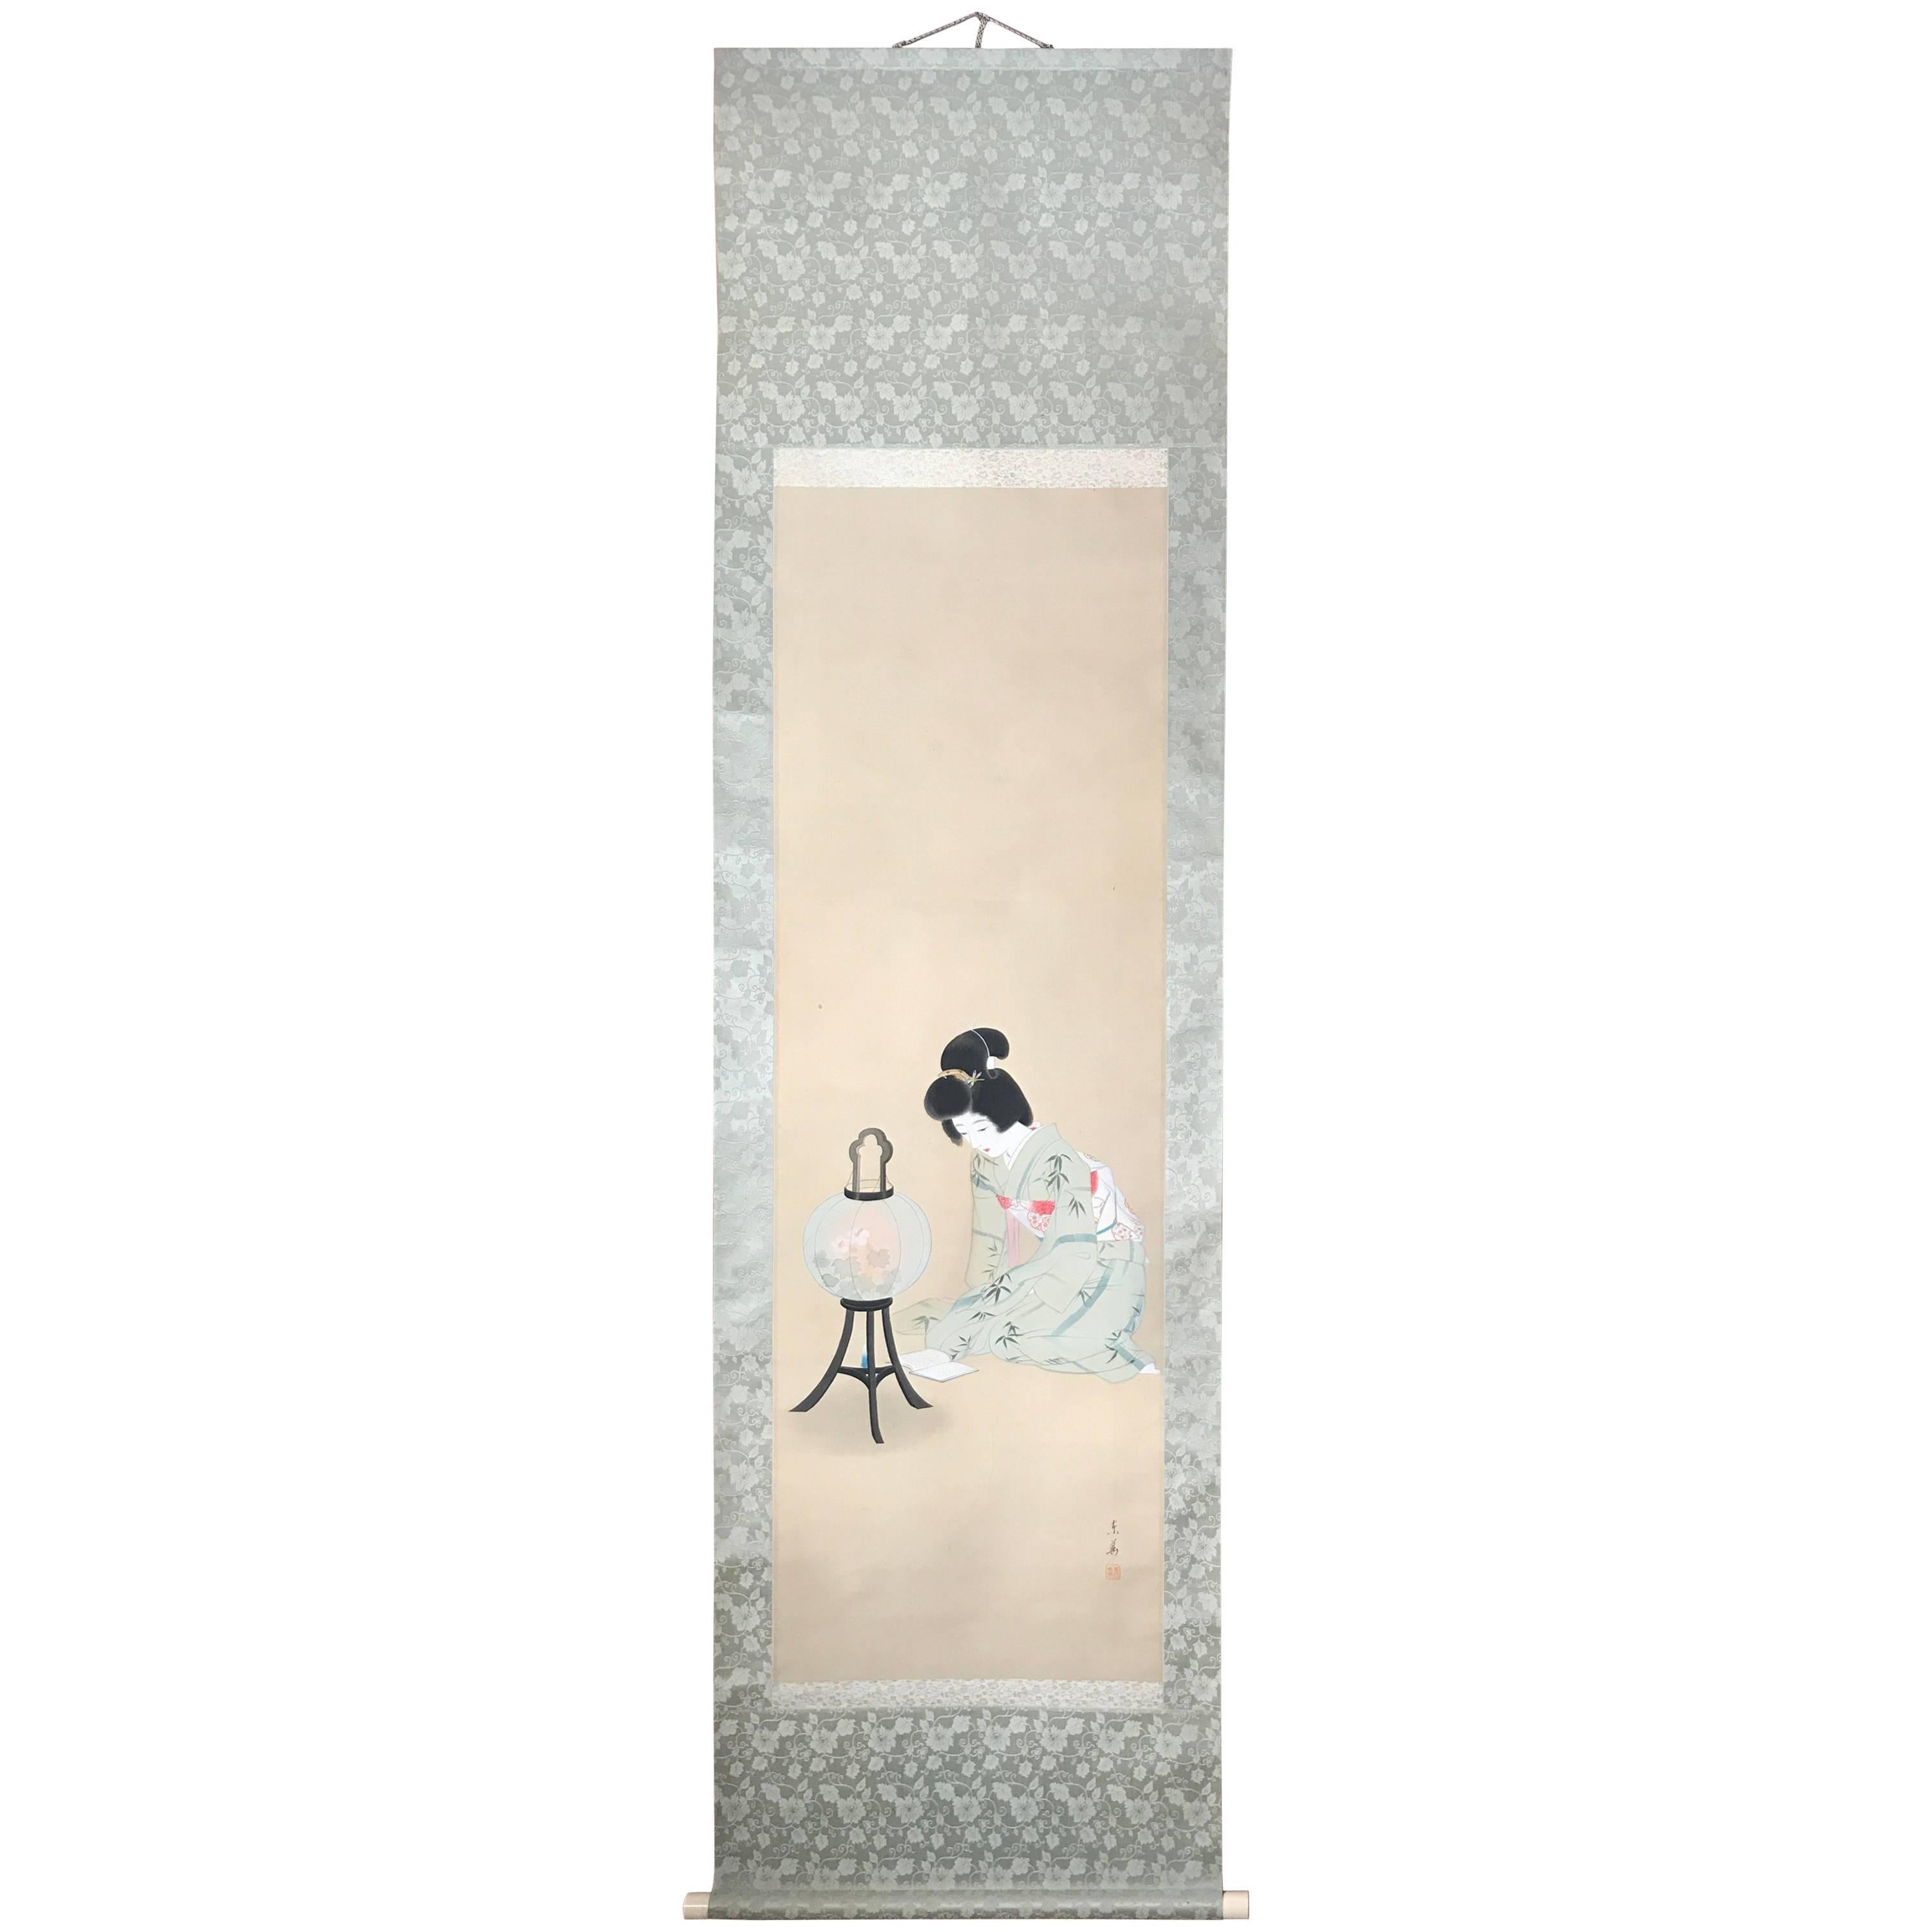 Hand-painted scroll Bijin gazing into a with floral lamp 
Painting on silk, signed. 
Dimensions: 21.5 inches wide and 79 inches length

Hand written Artist name signature as photographed,
Bone rollers.

Japan, attractive composition of a Bijji in